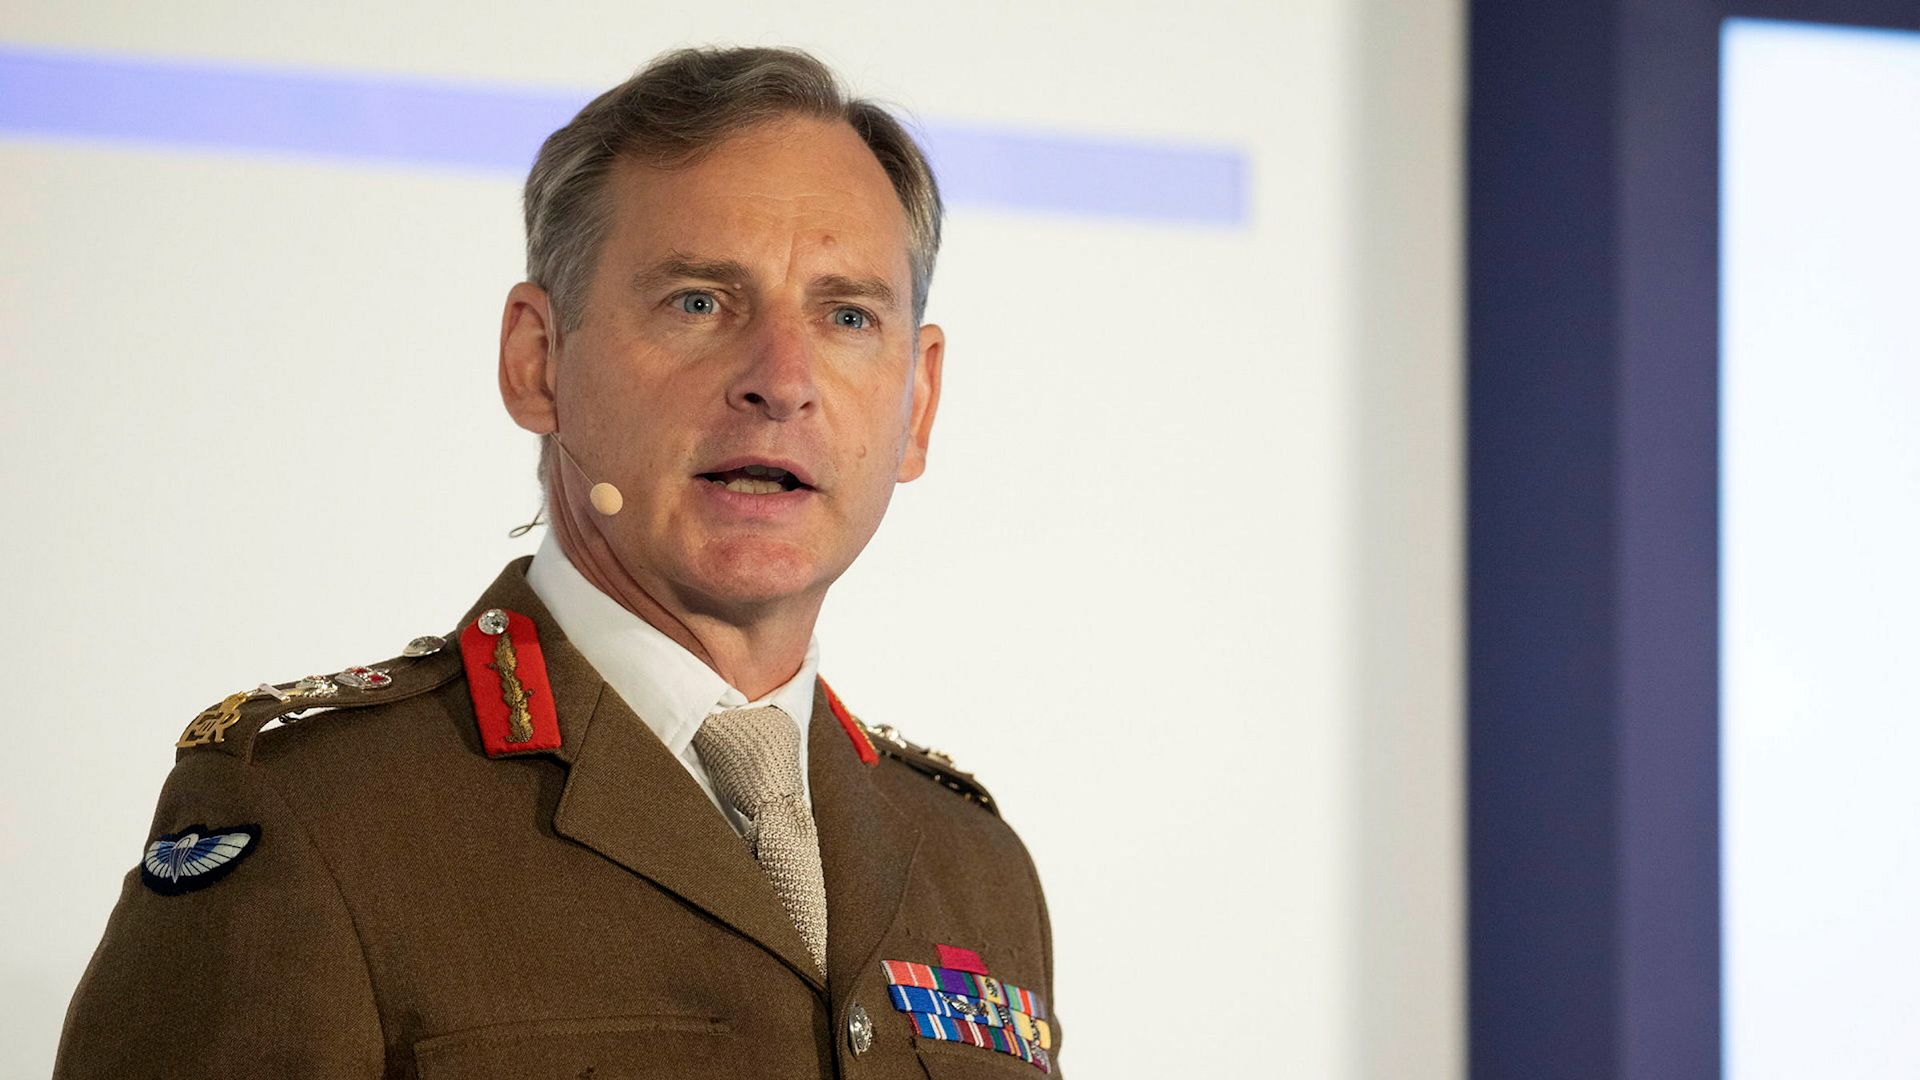 A digital age for the British Army - Callback to CGS’ speech at DSEI 2021